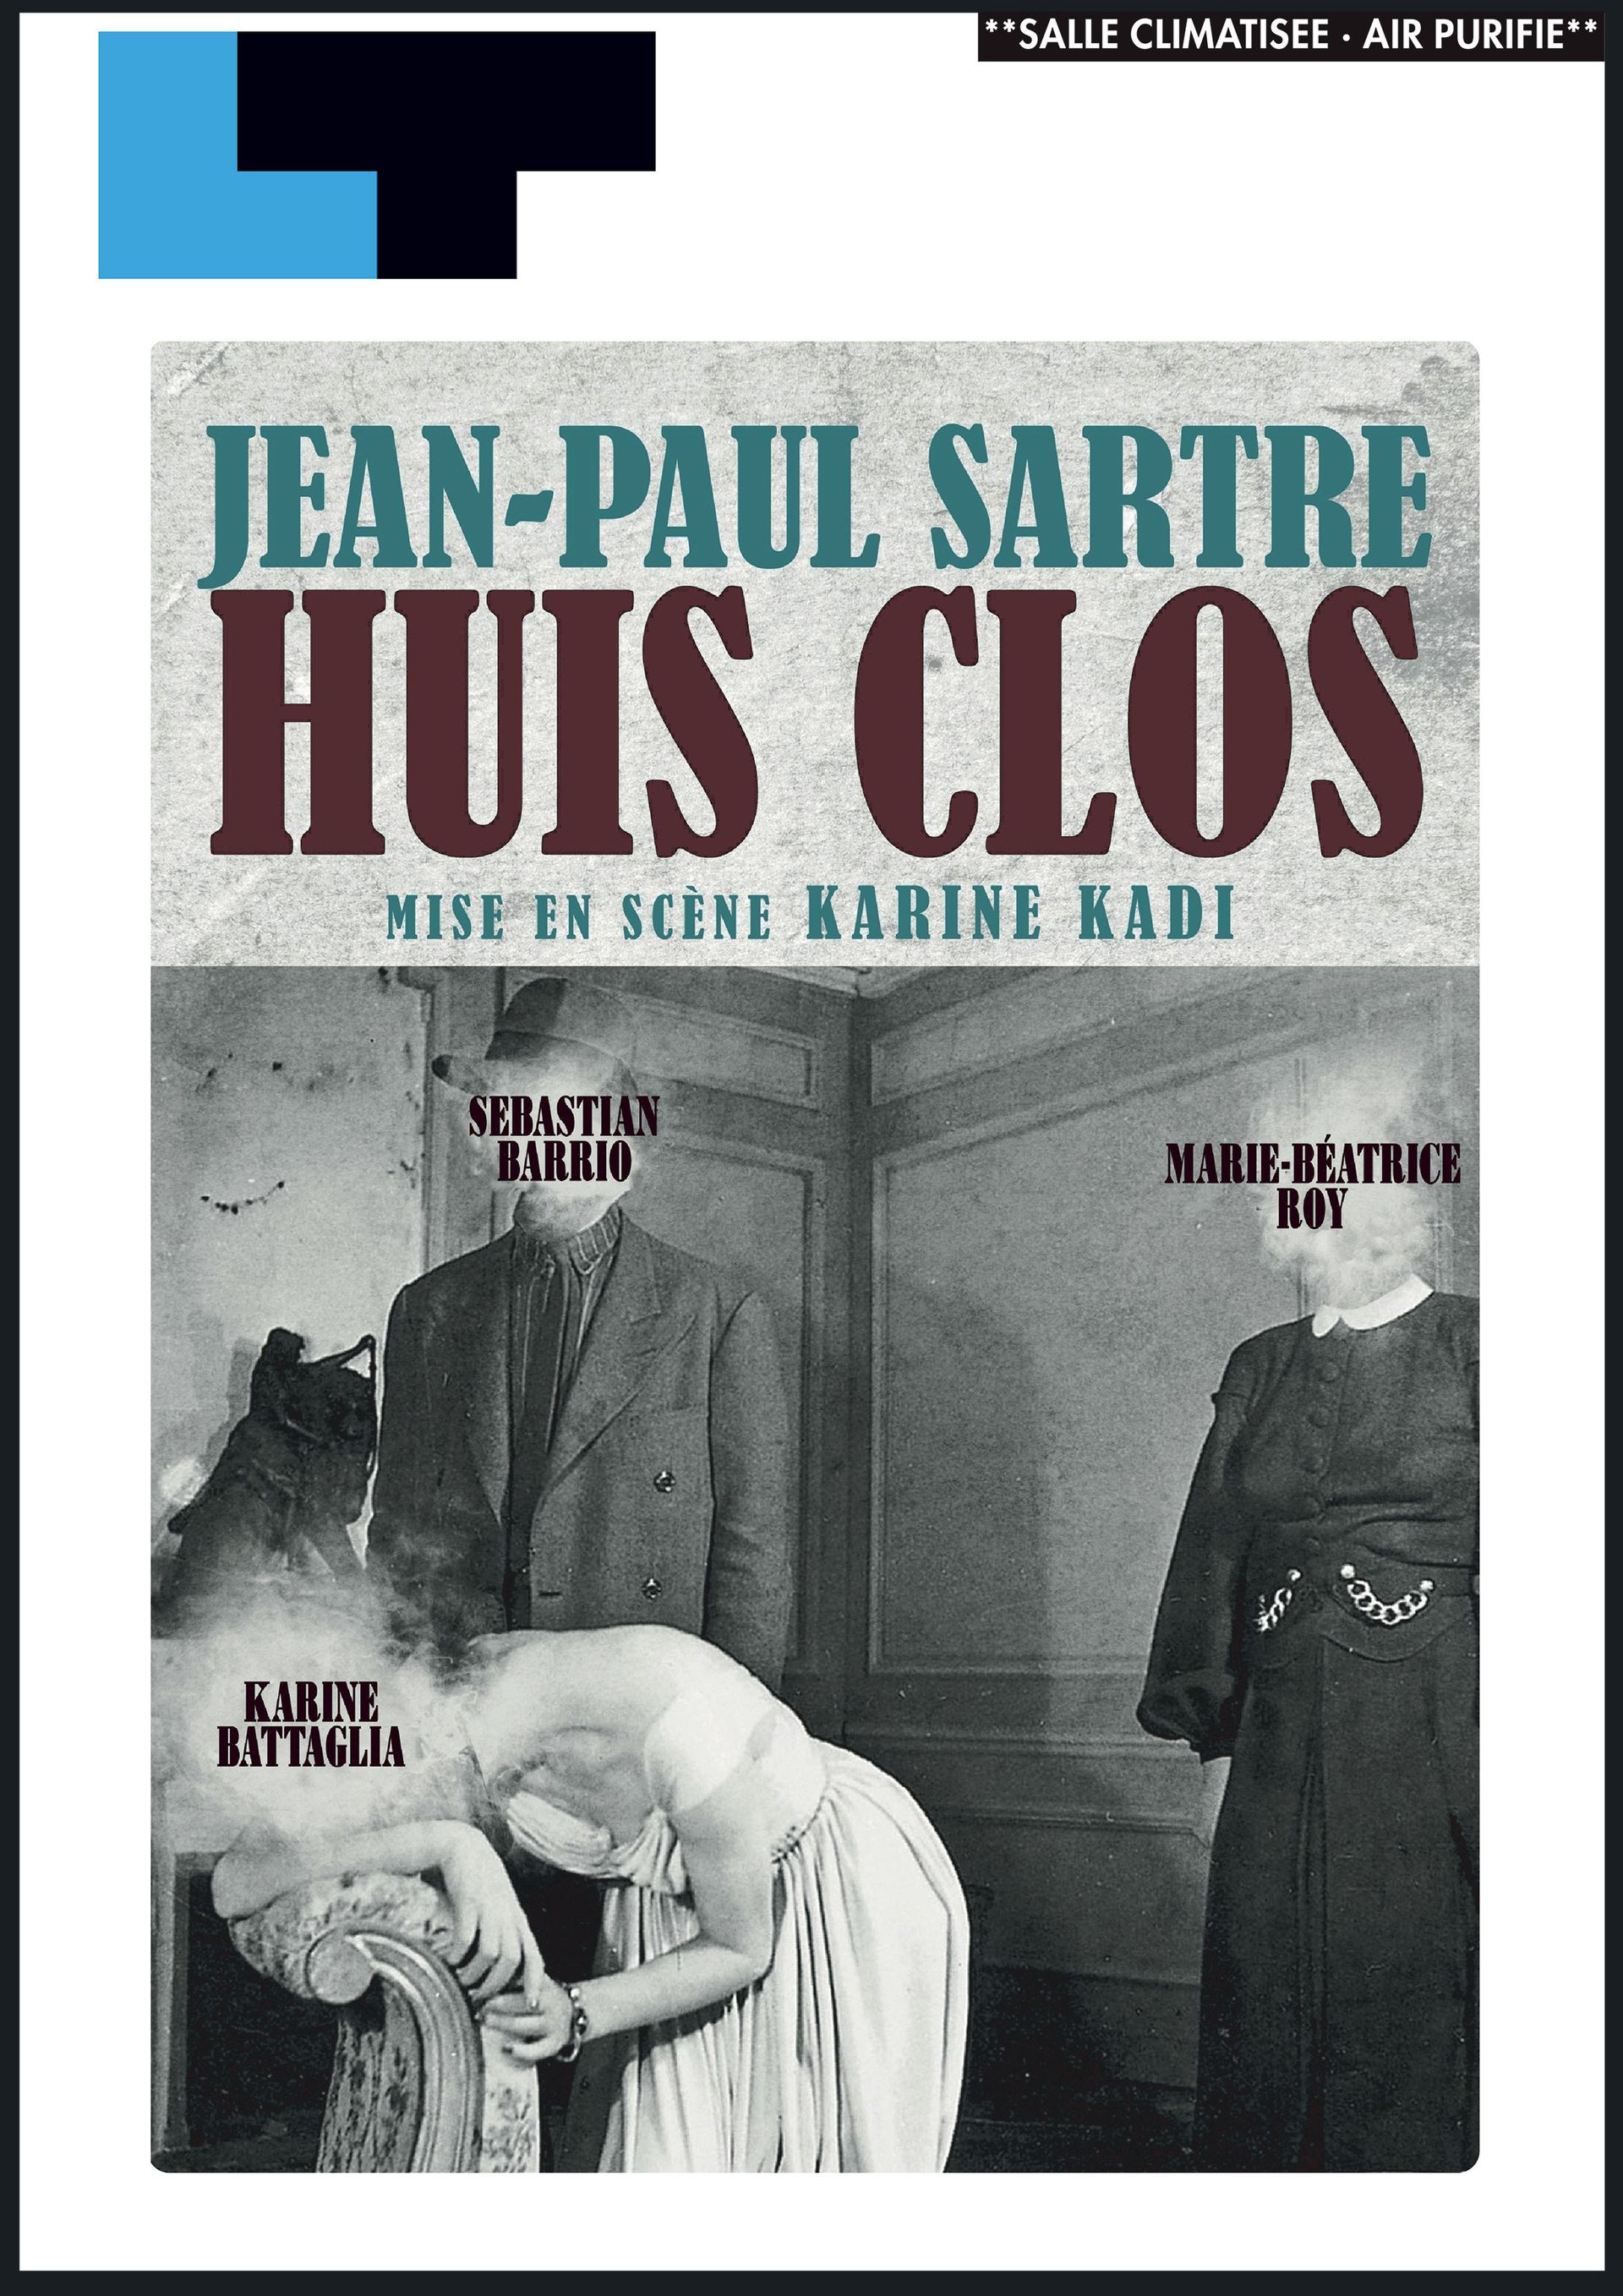 A movie poster for jean-paul sartre huis clos